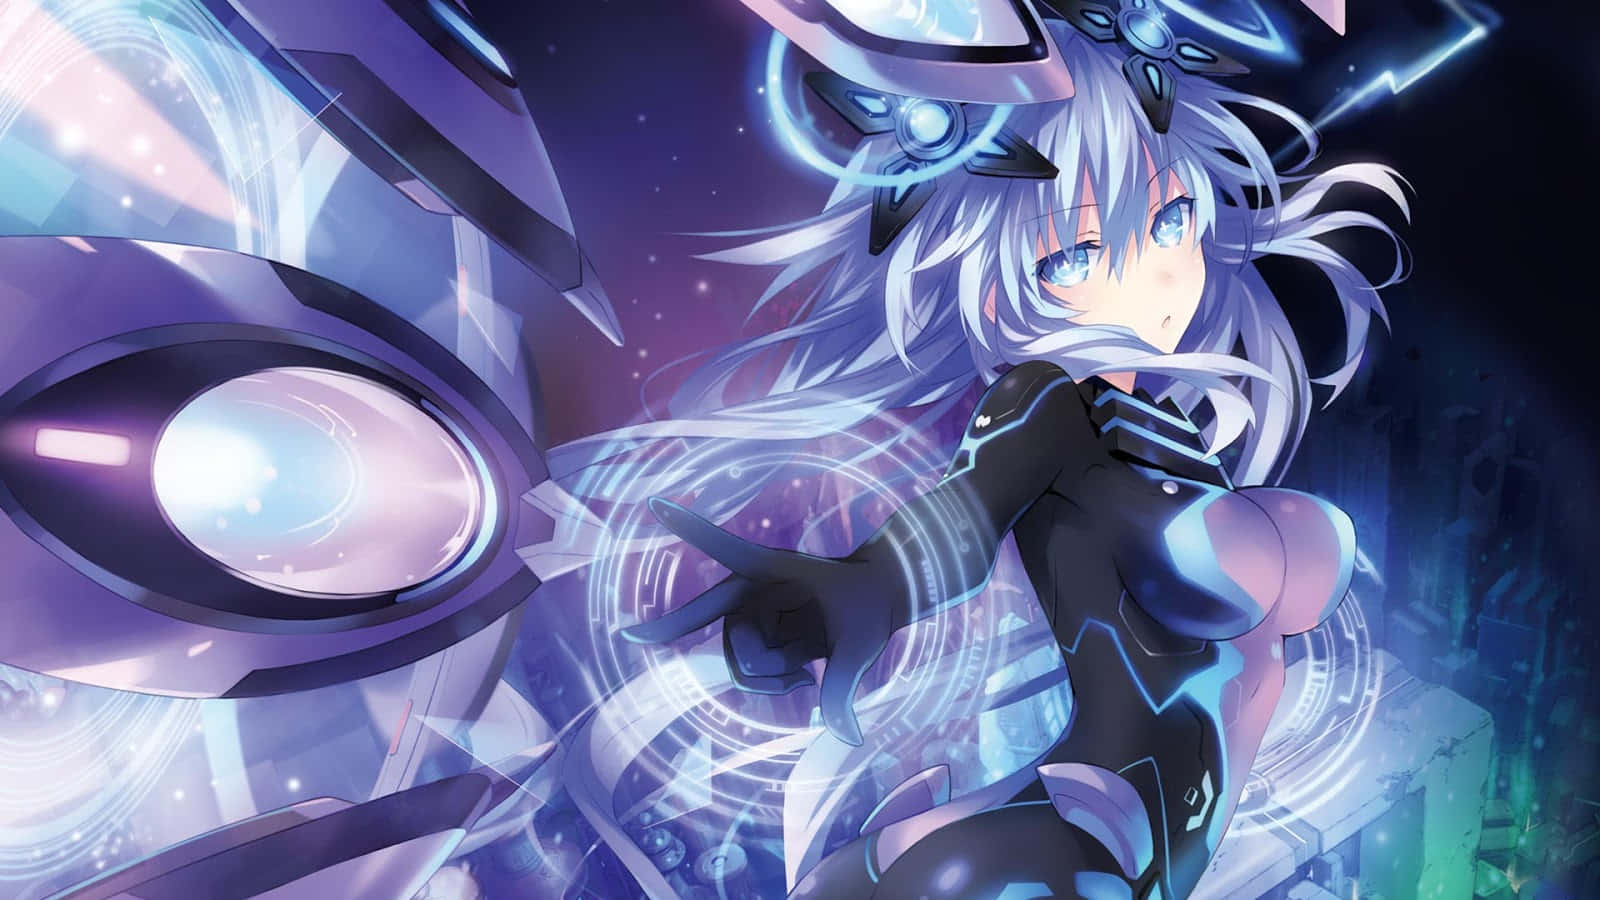 Characters from Hyperdimension Neptunia in Action Wallpaper